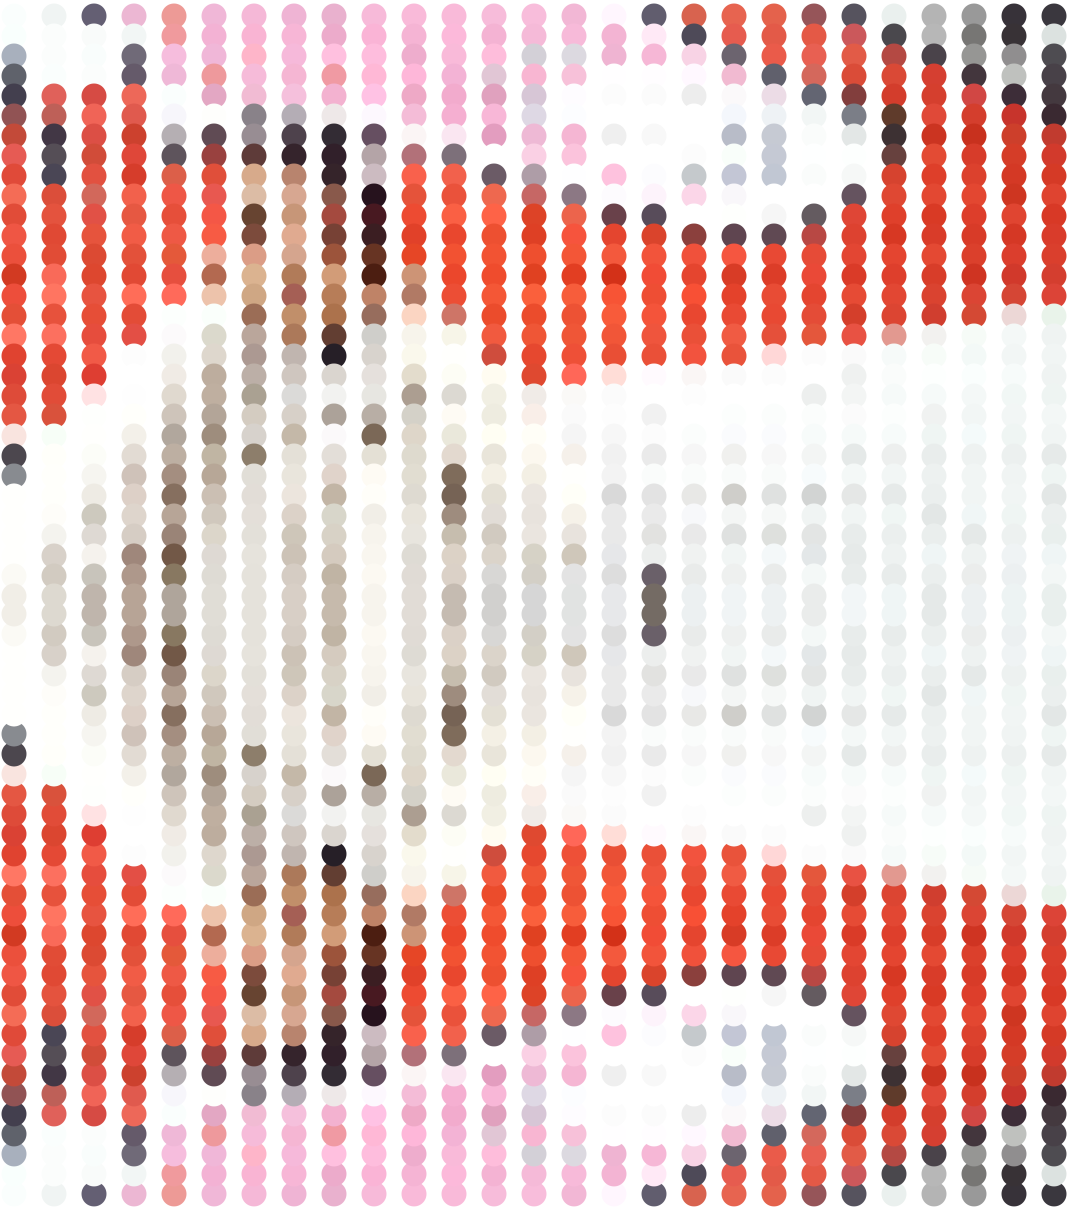 same image from the main page, but dots are 25px, separated vertically, and also vertically the dots are on top of each other from bottom to top, white background